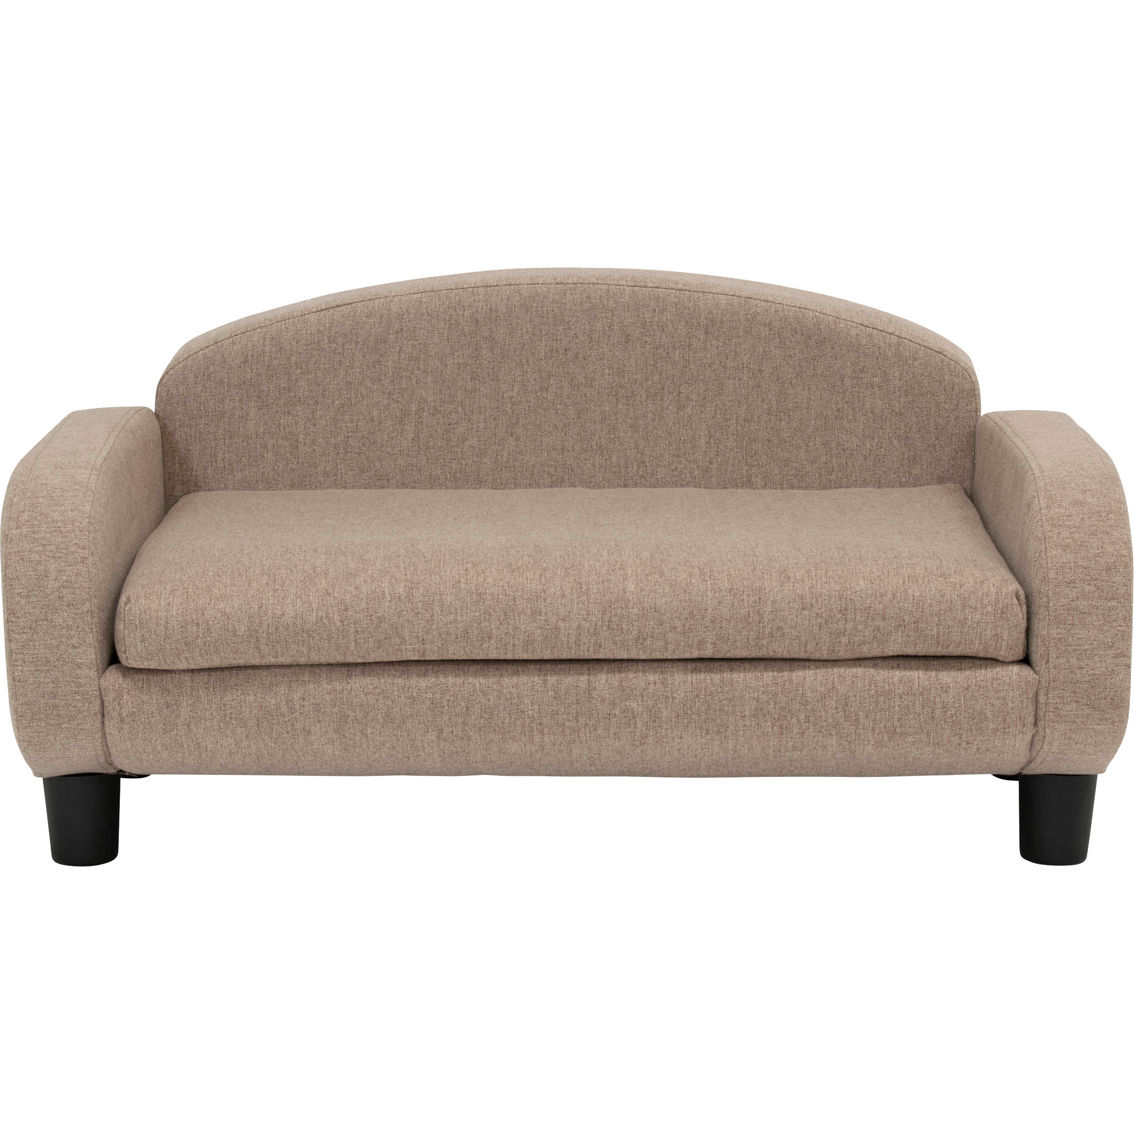 Studio Designs Paws and Purrs Pet Sofa Small - Image 4 of 9